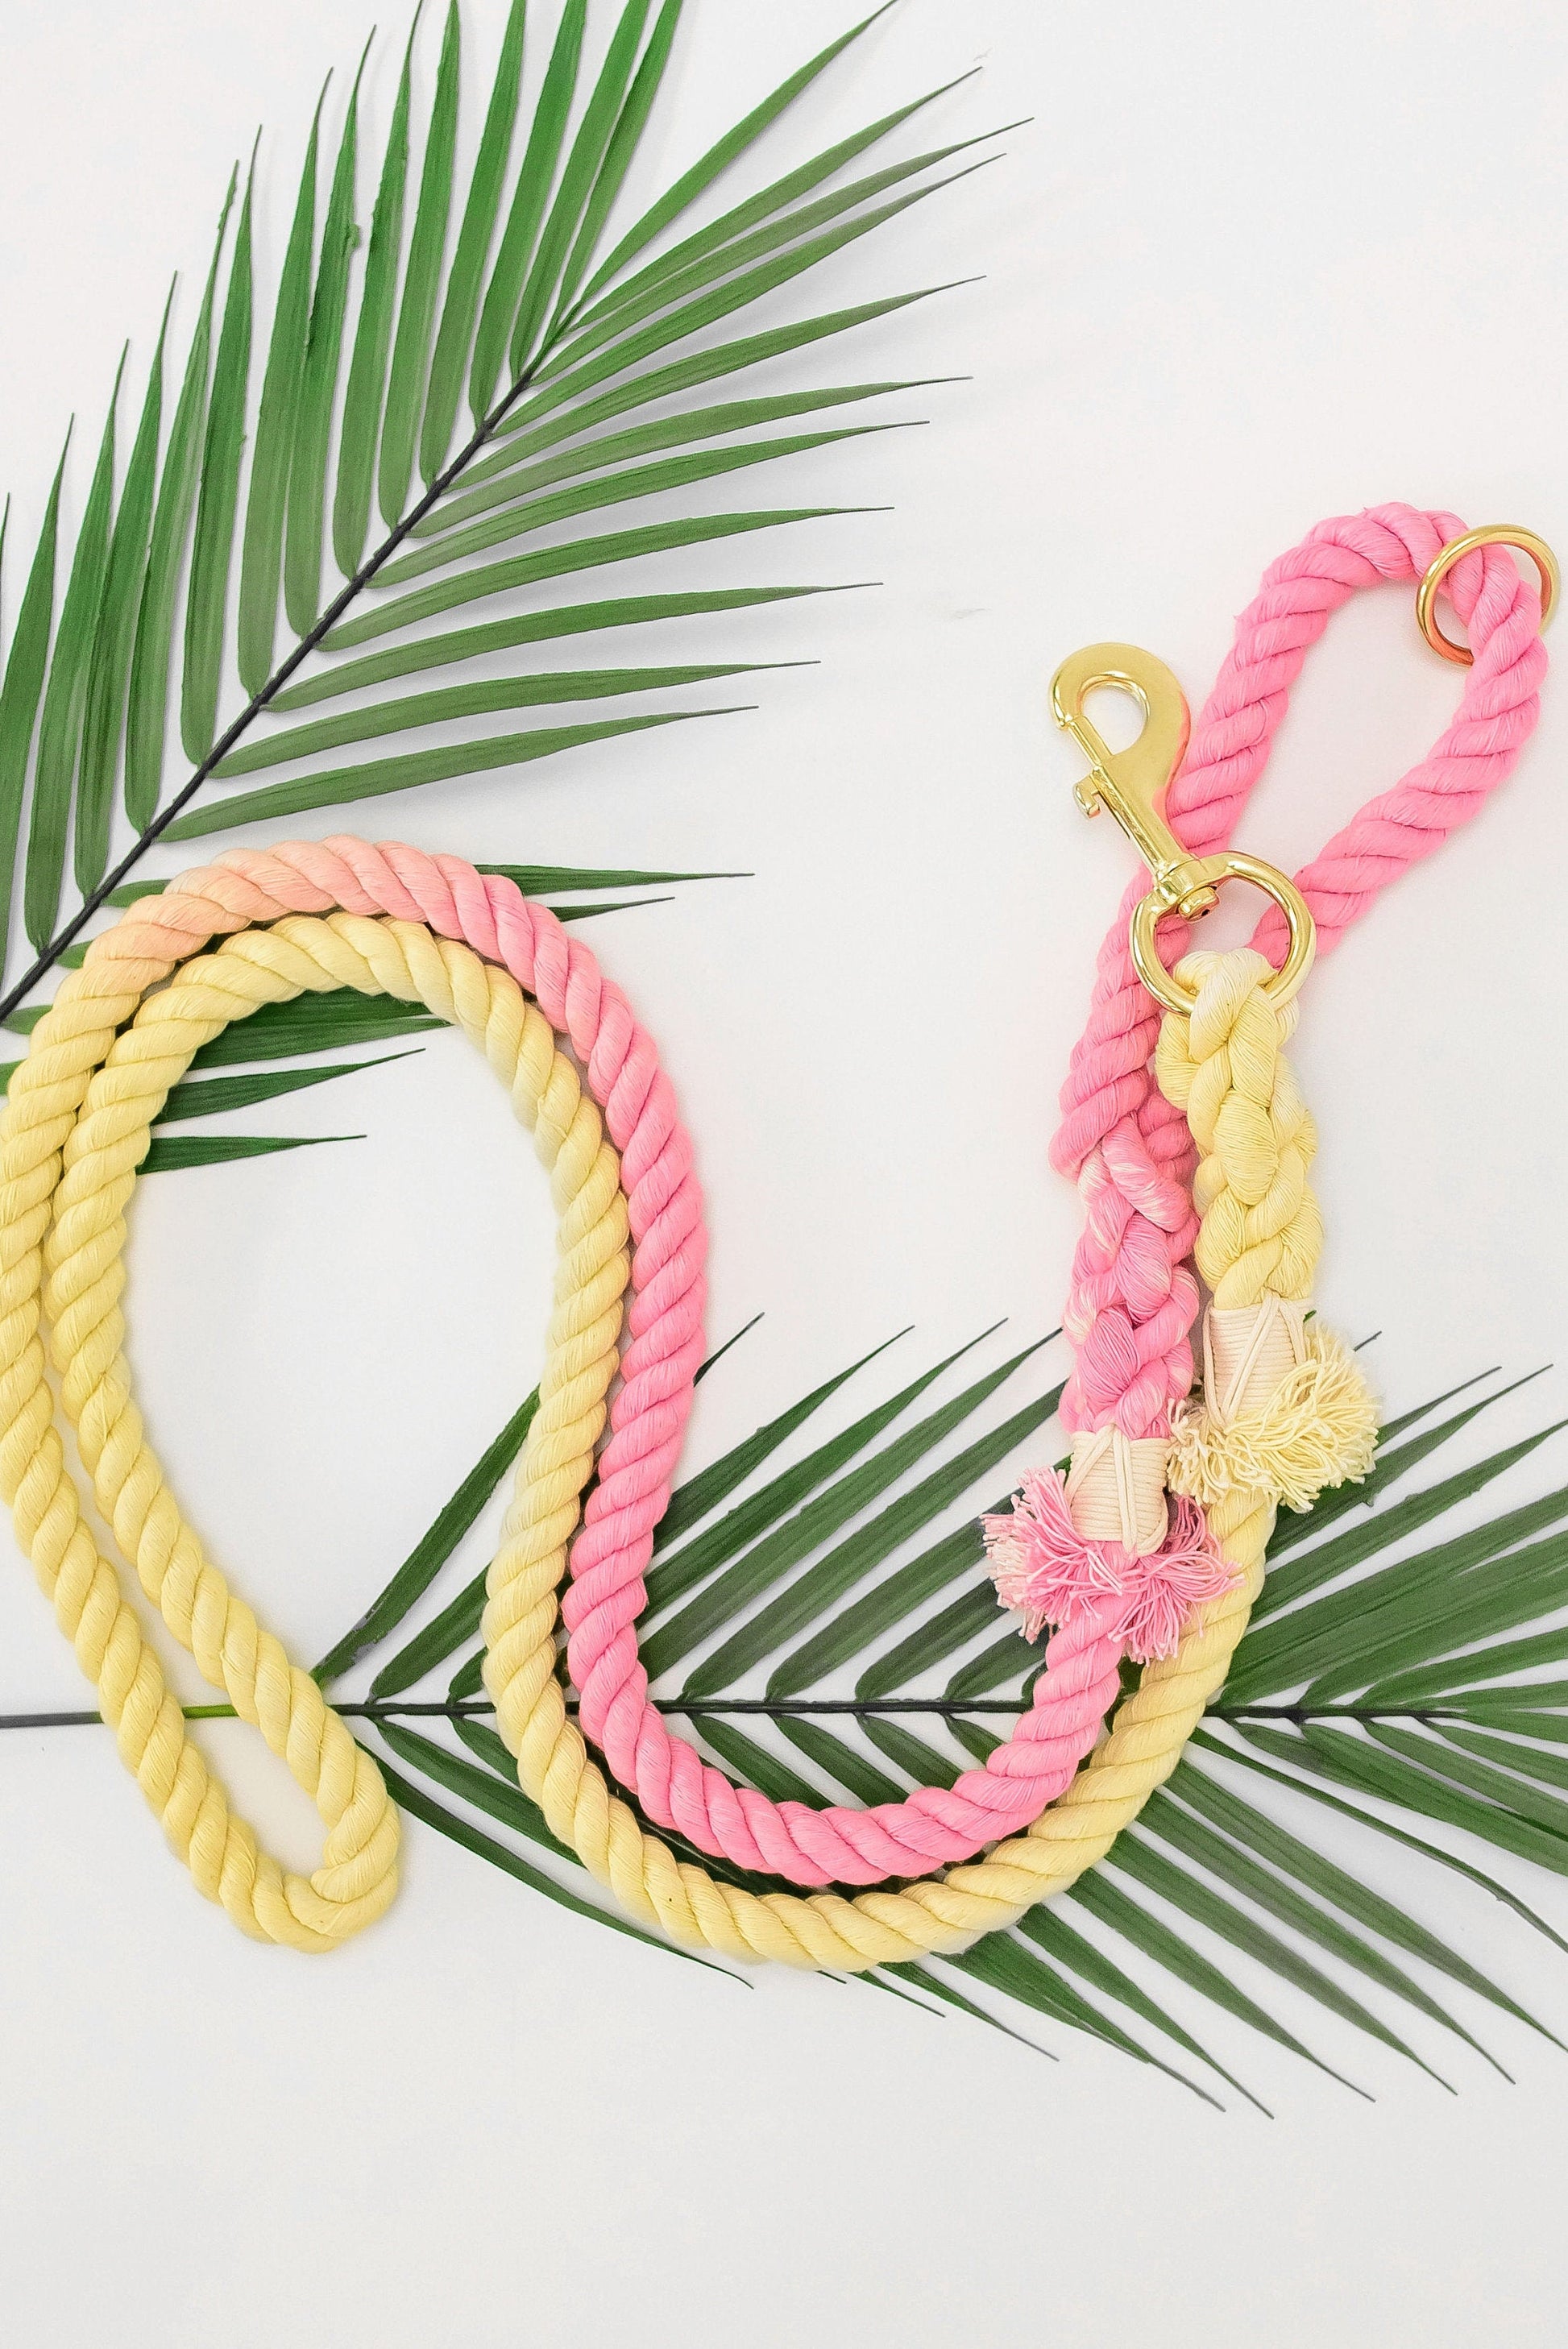 Products Ombré Pink and Yellow Cotton Rope Leash - Dog Gift - Gift for Her - Pet Birthday Gift - Dog Accessory - Dog Lover Gift - Wedding Leash